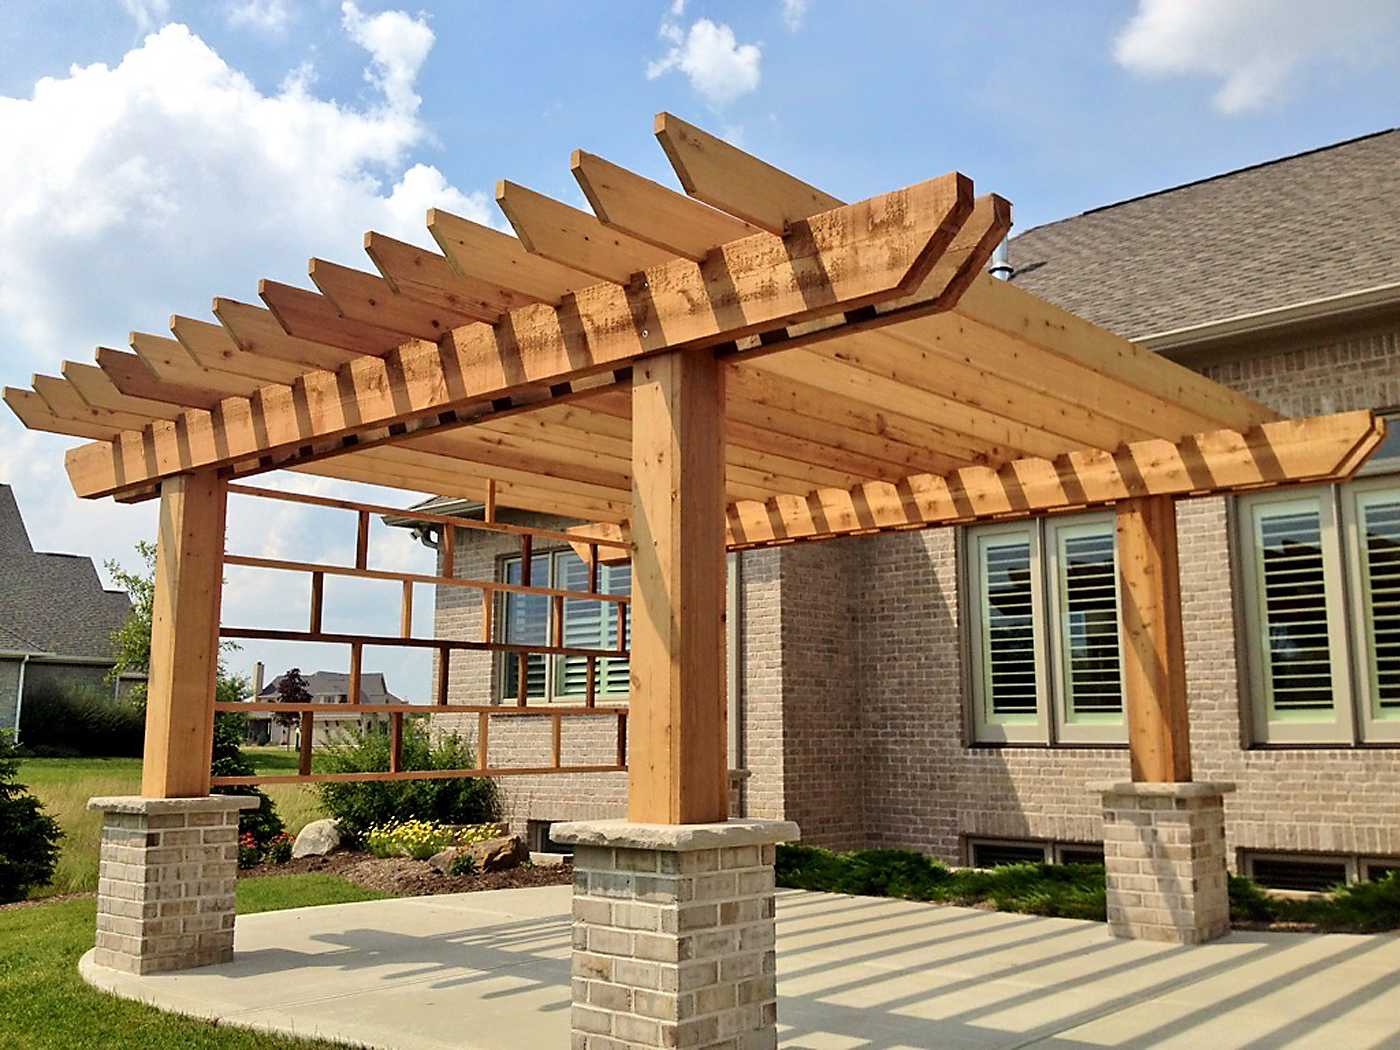 A properly planned pergola can offer relief from the sun as even the columns and posts contribute to the shade. (Submitted photo)